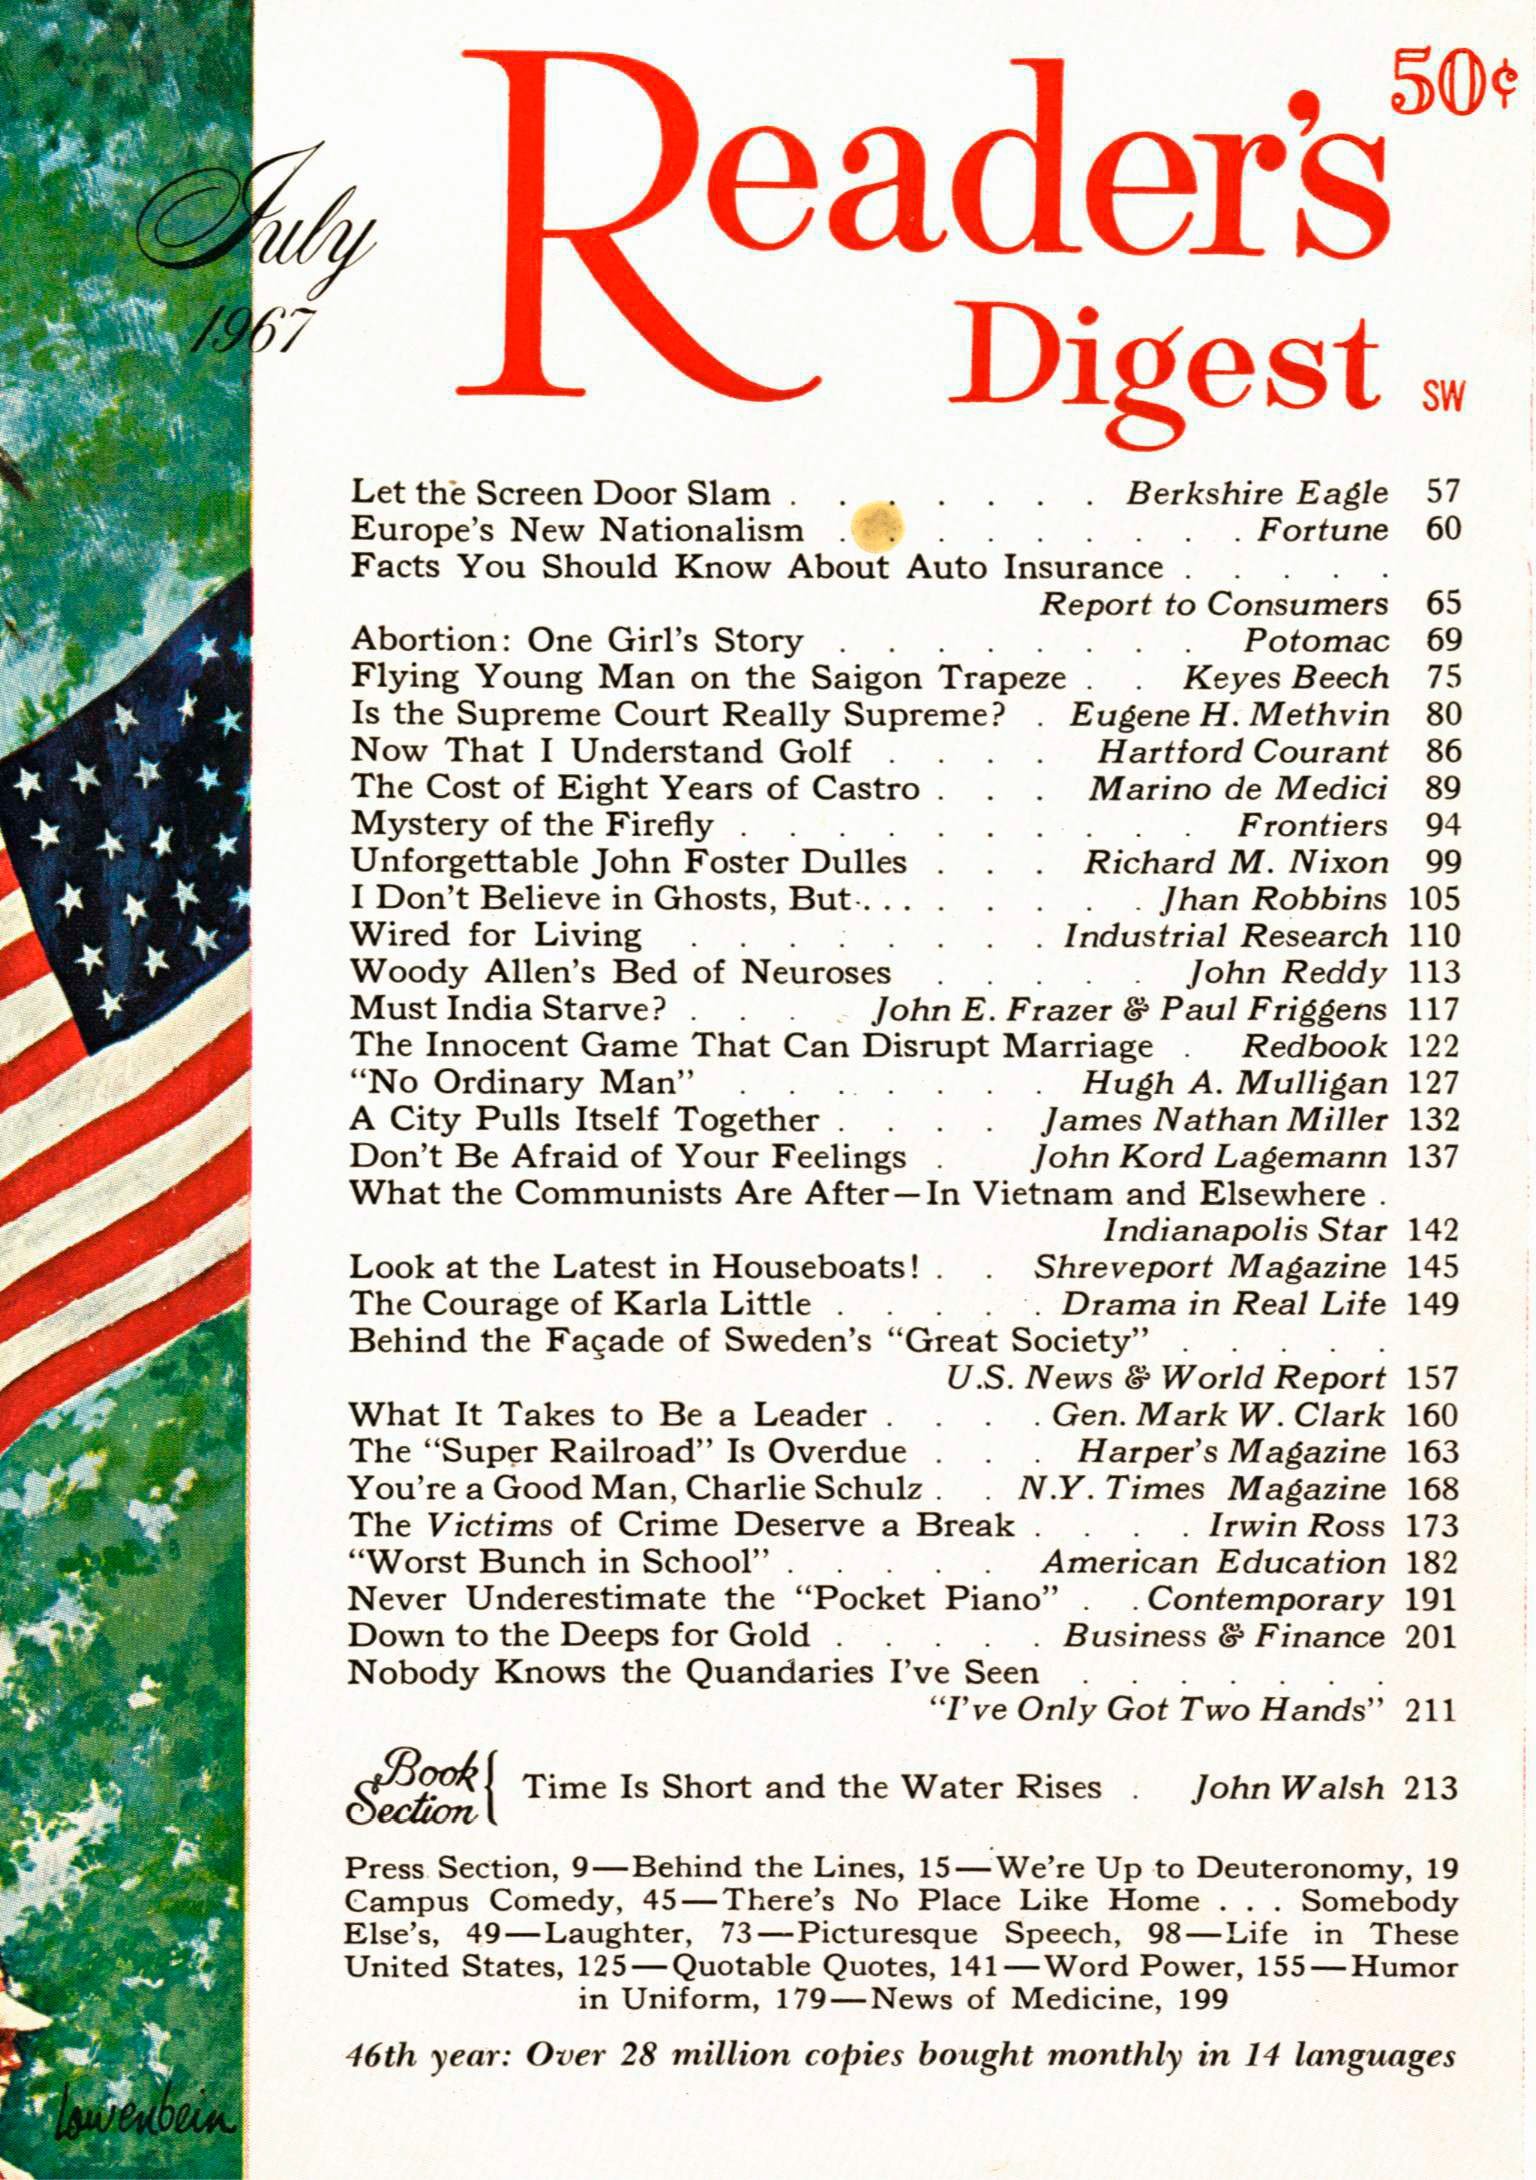 Vintage Reader's Digest Covers That Will Take You Back Reader's Digest